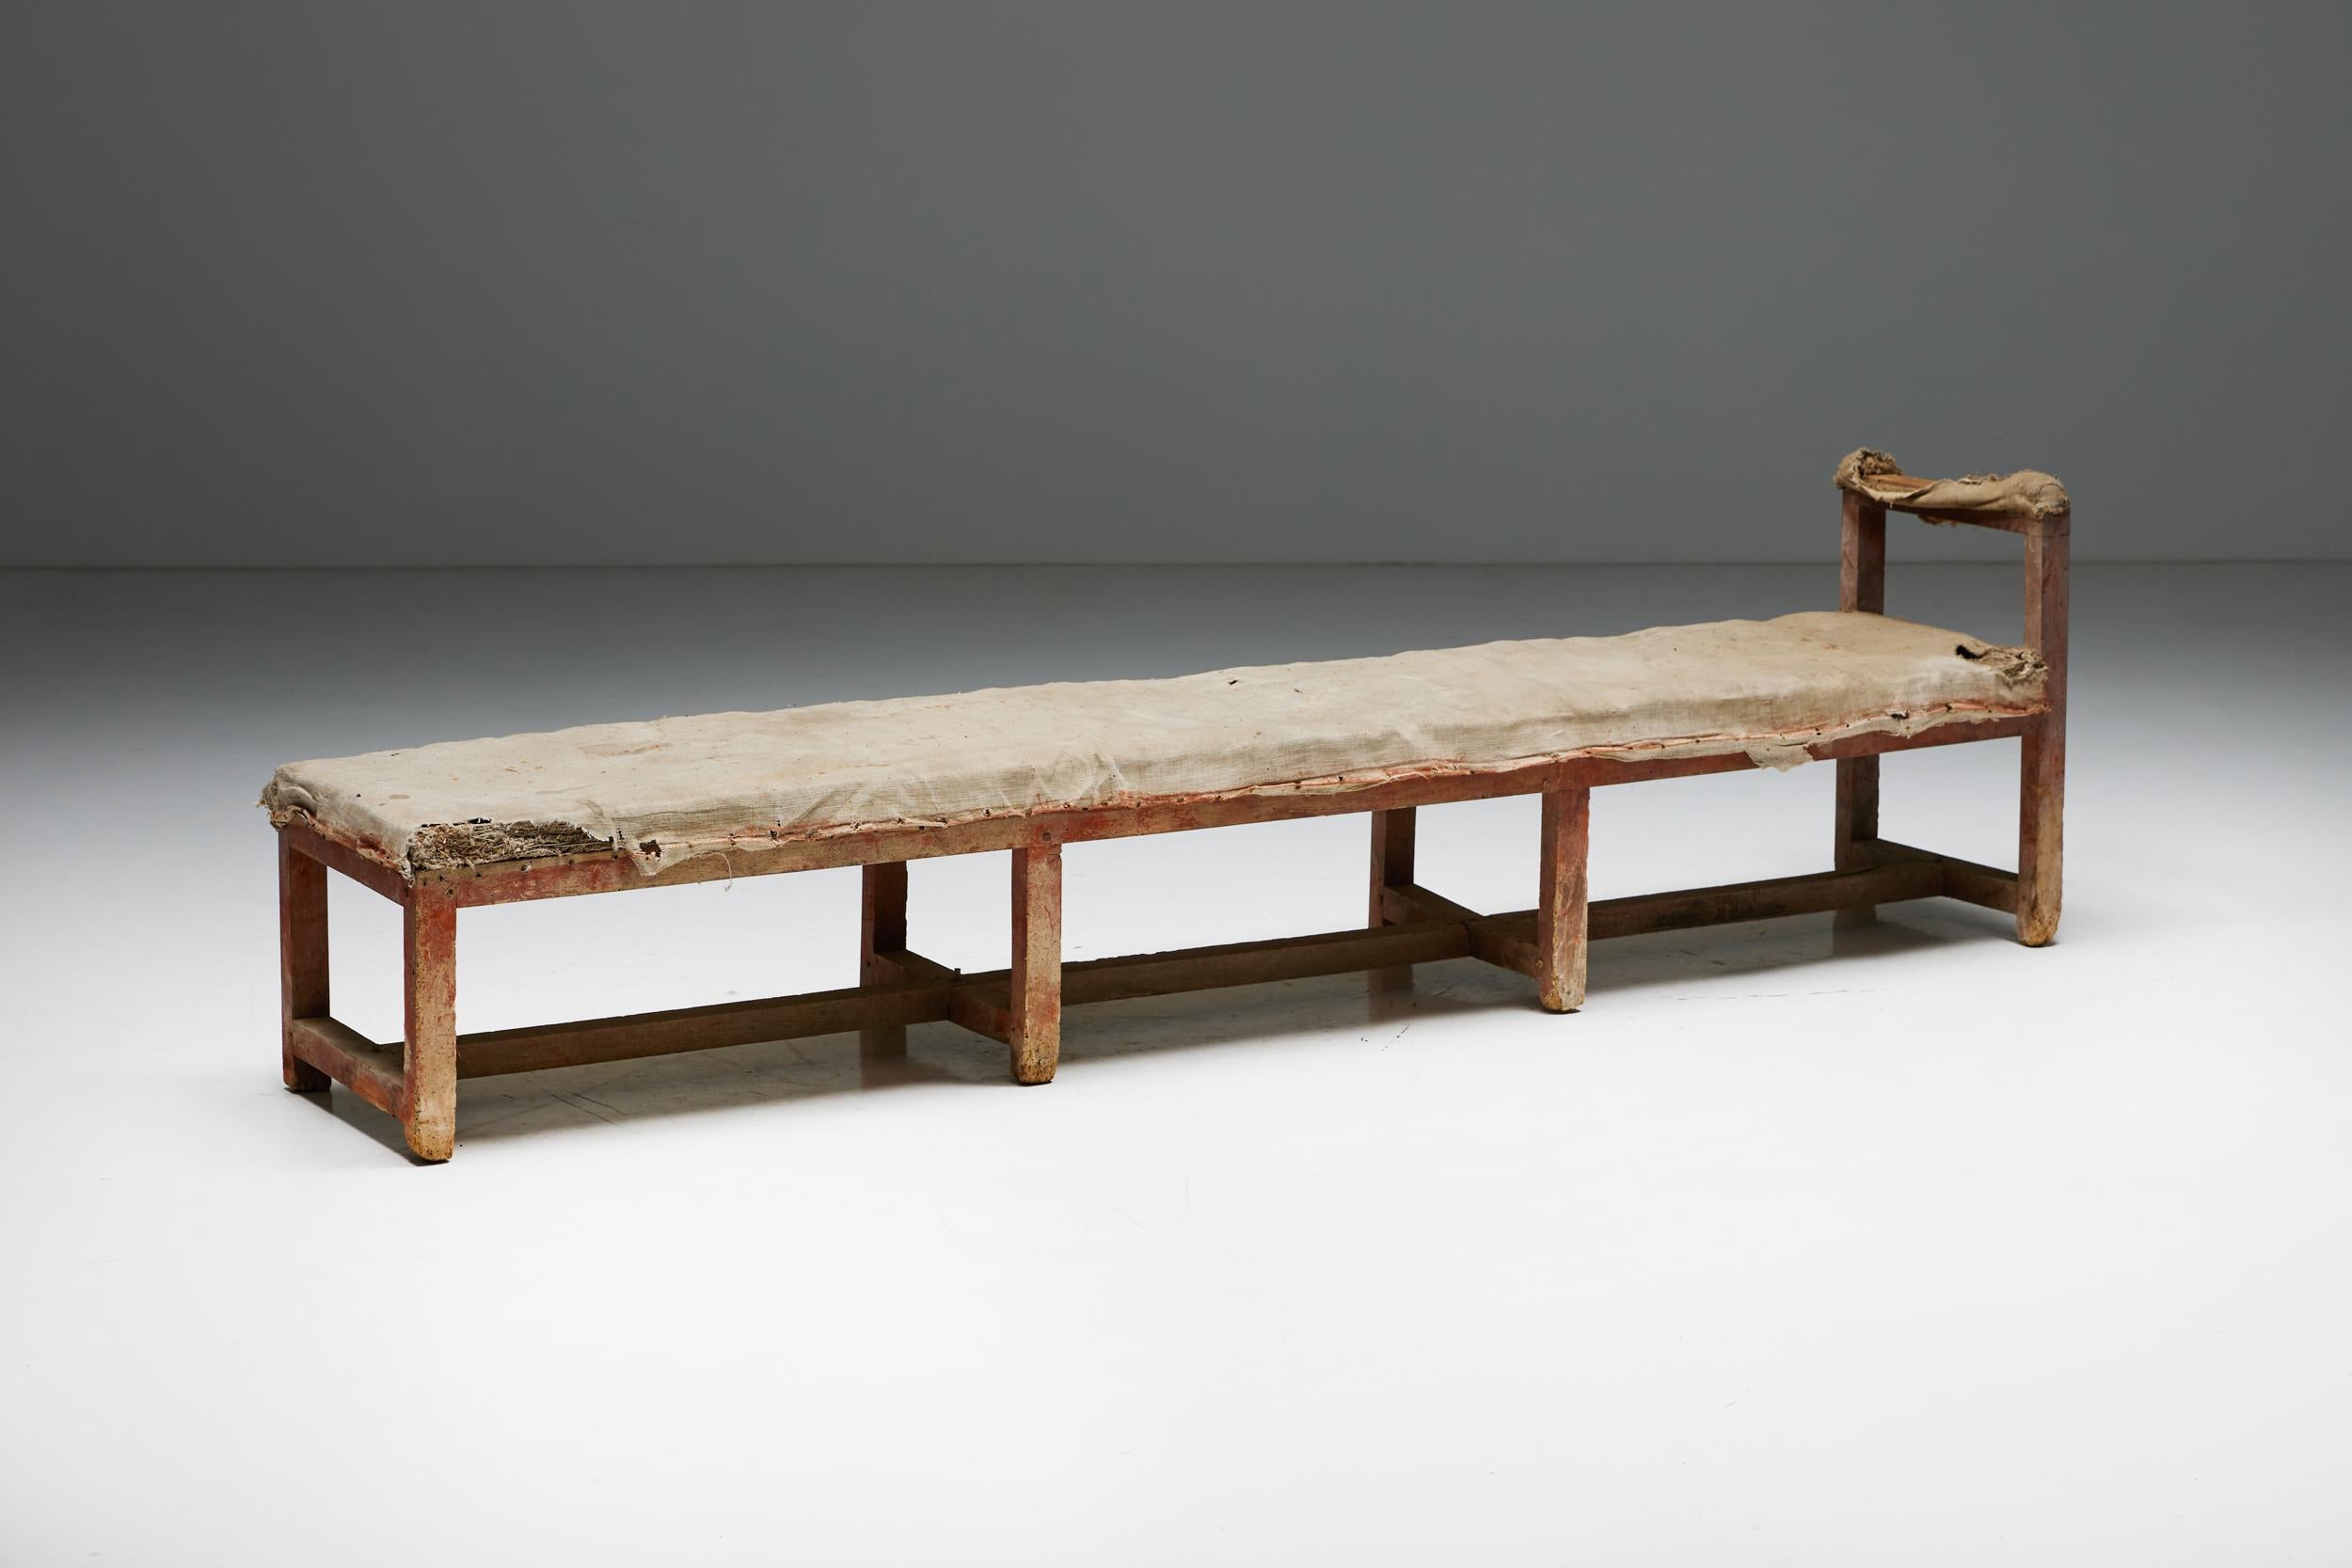 Pair of Rustic Travail Populaire Benches, France, 19th Century For Sale 7